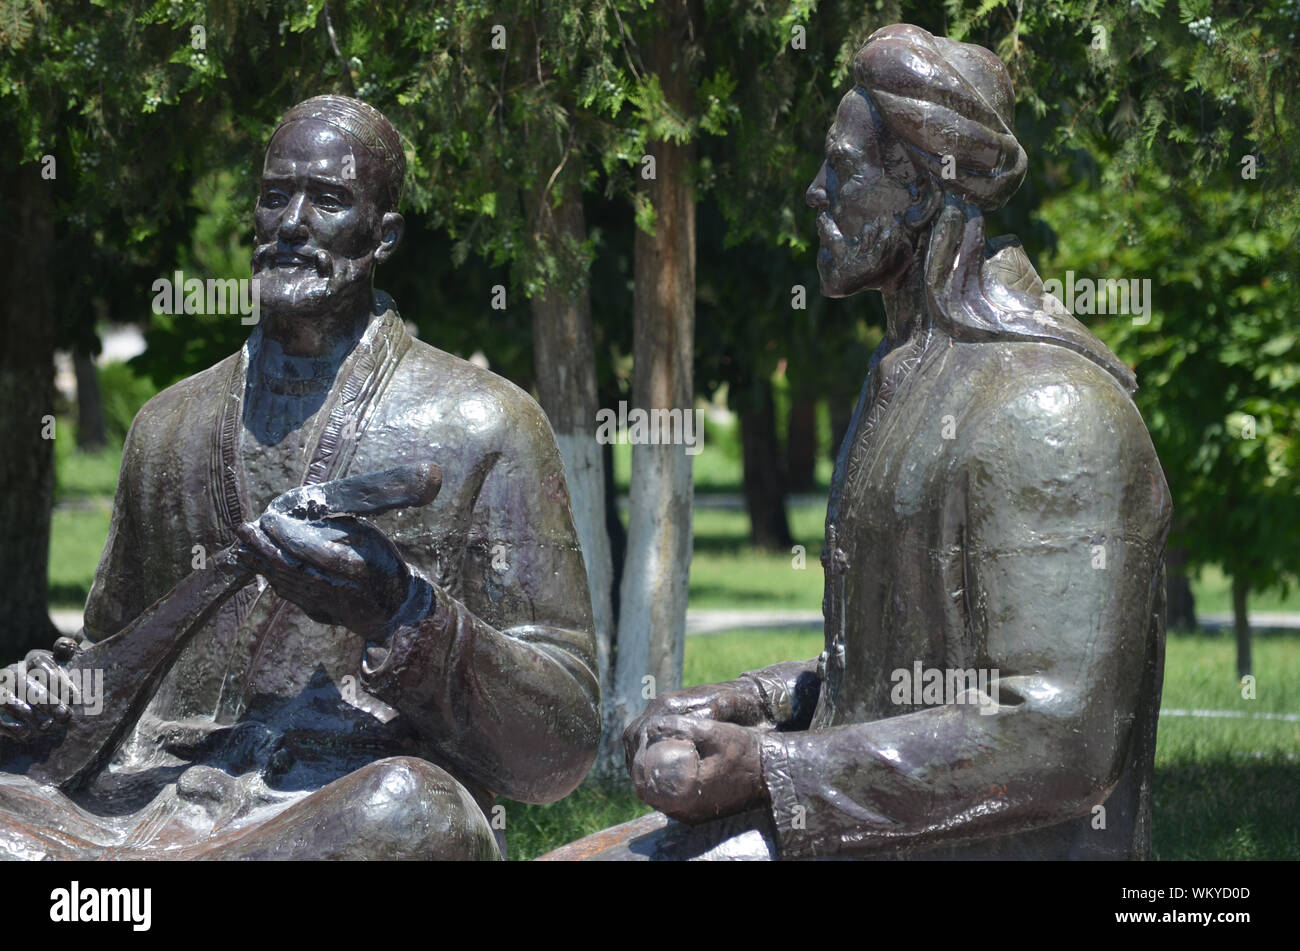 Statues of classical Persian poets at the Garden of Poets near the Registan, Samarkand (Uzbekistan) Stock Photo